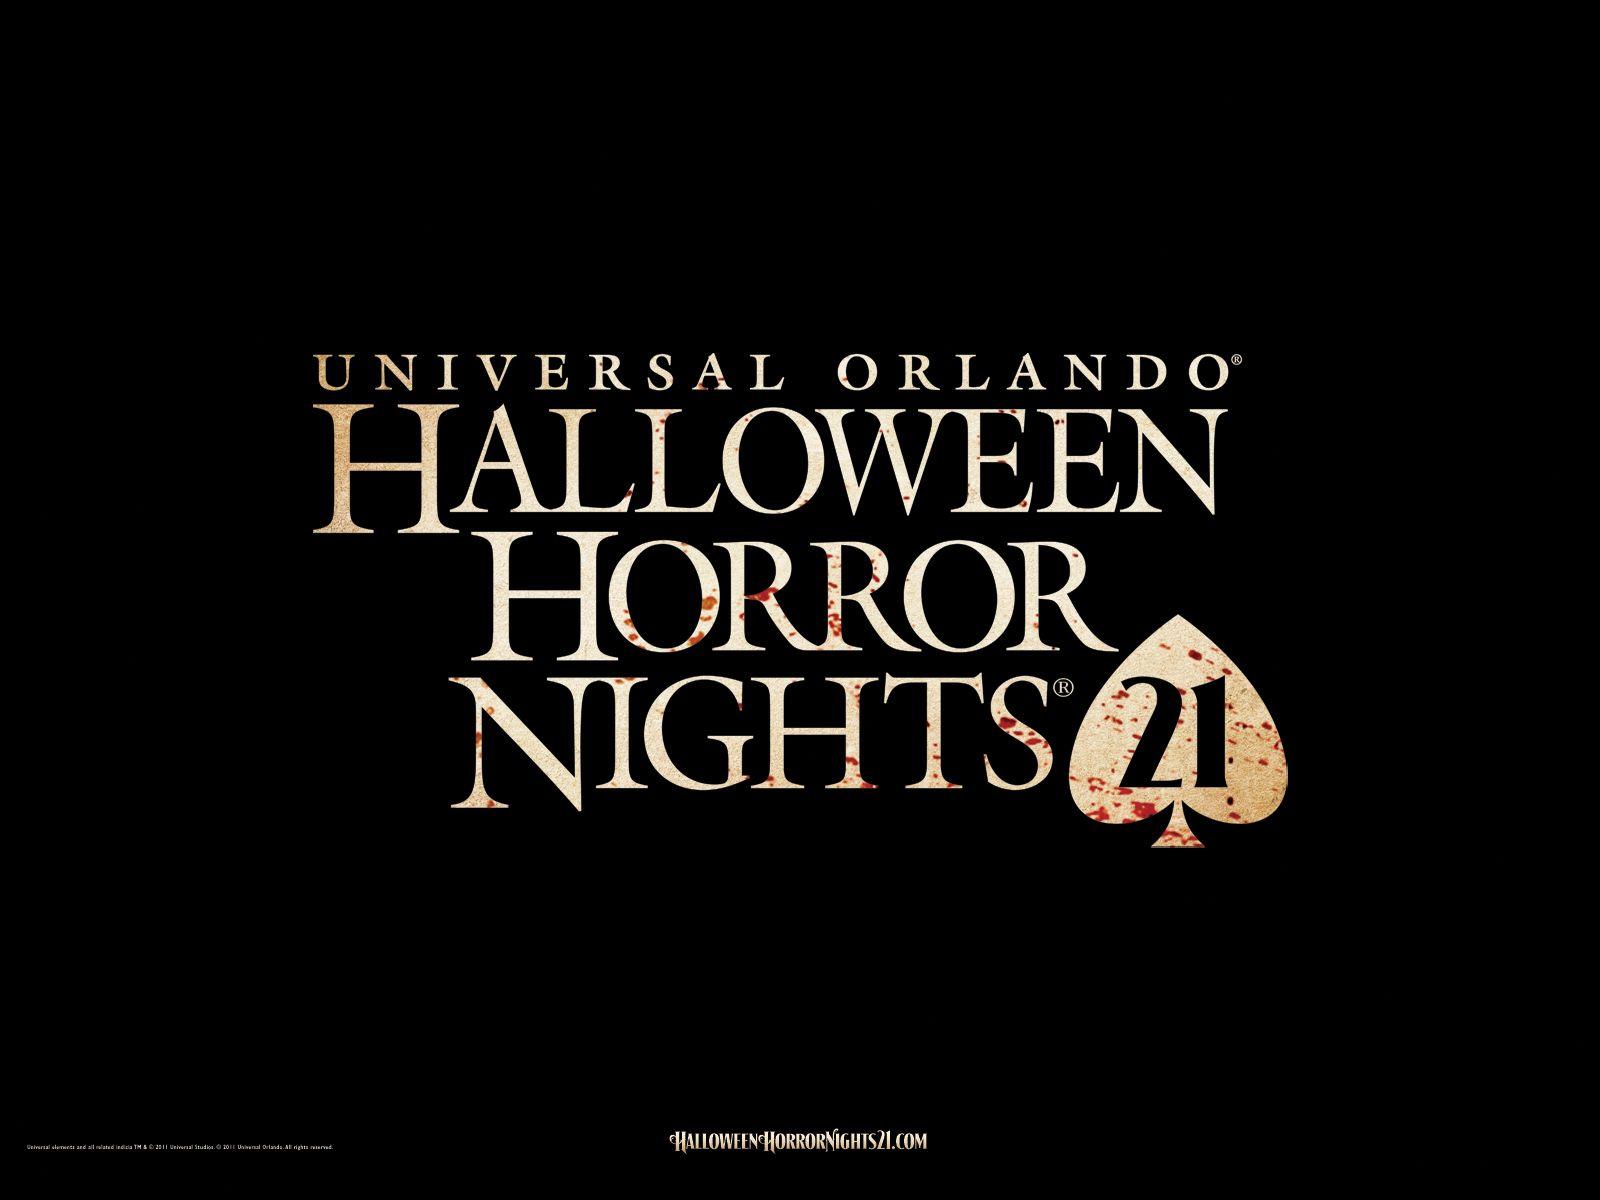 Download the Free Halloween Horror Nights Wallpaper and Firefox